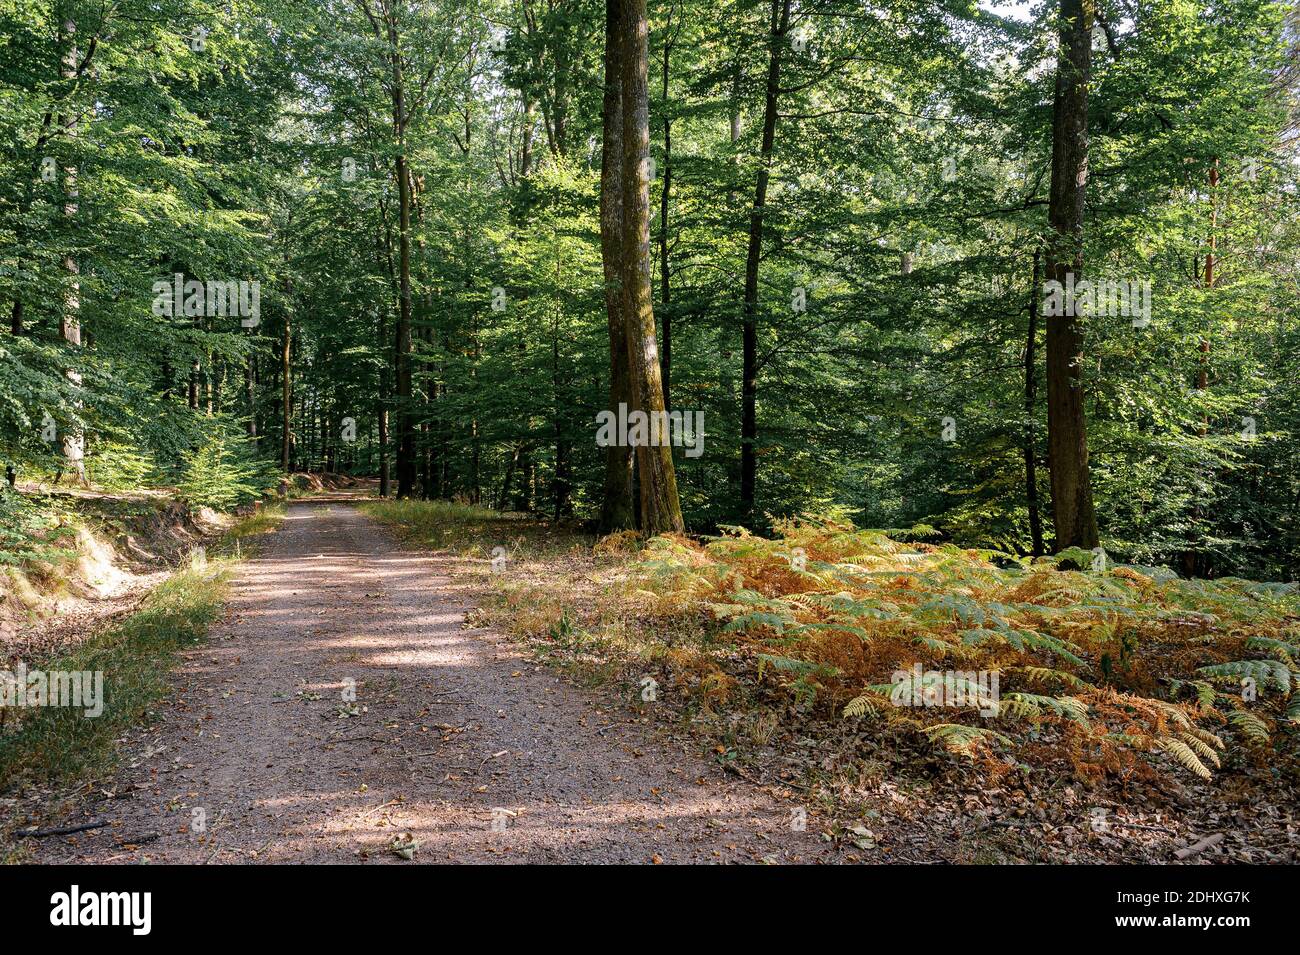 A logging road runs through a forest of oaks and beeches. Ferns grow on the right side of the road. Stock Photo